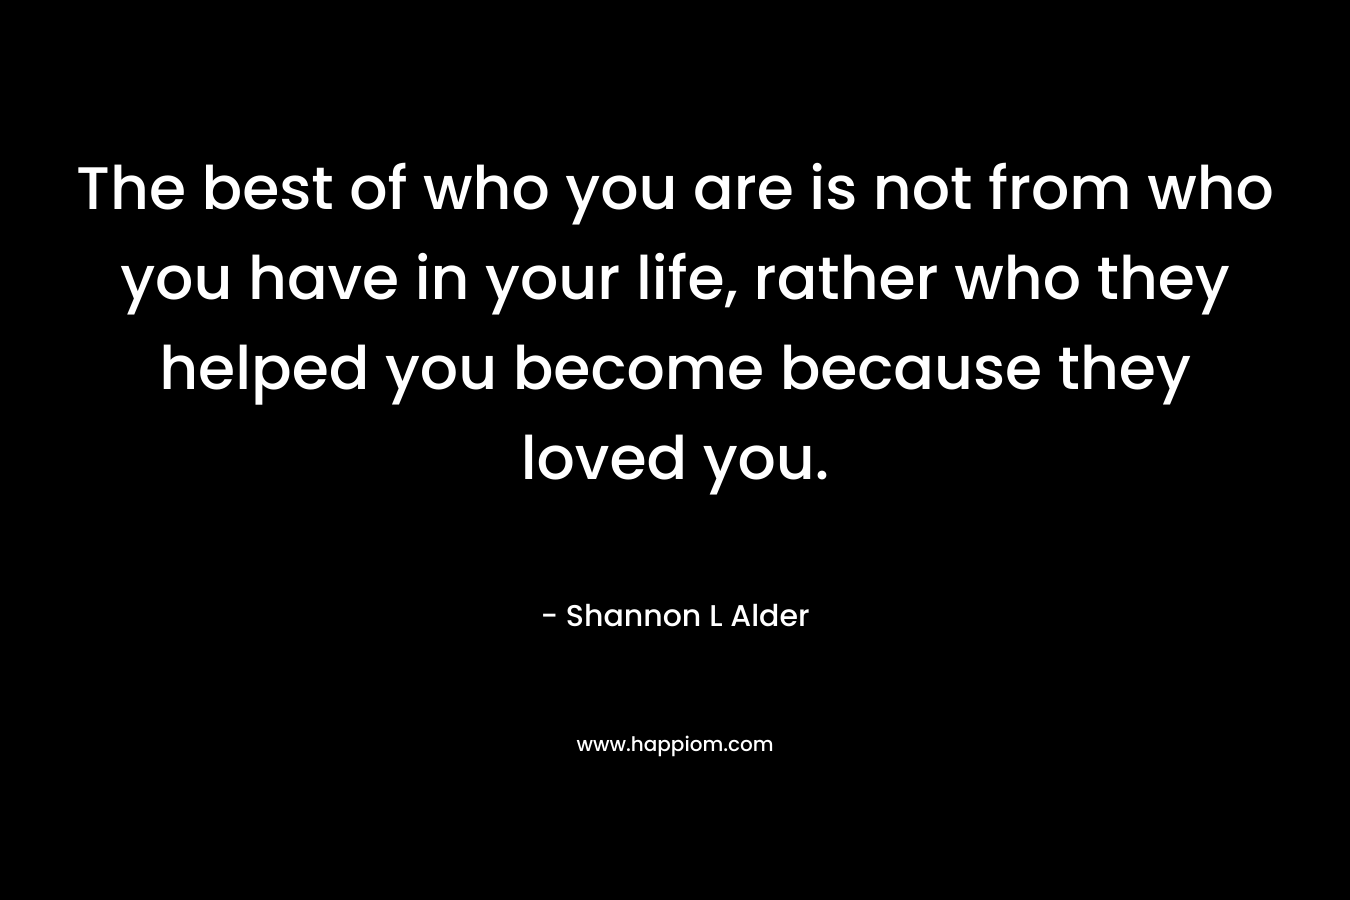 The best of who you are is not from who you have in your life, rather who they helped you become because they loved you.